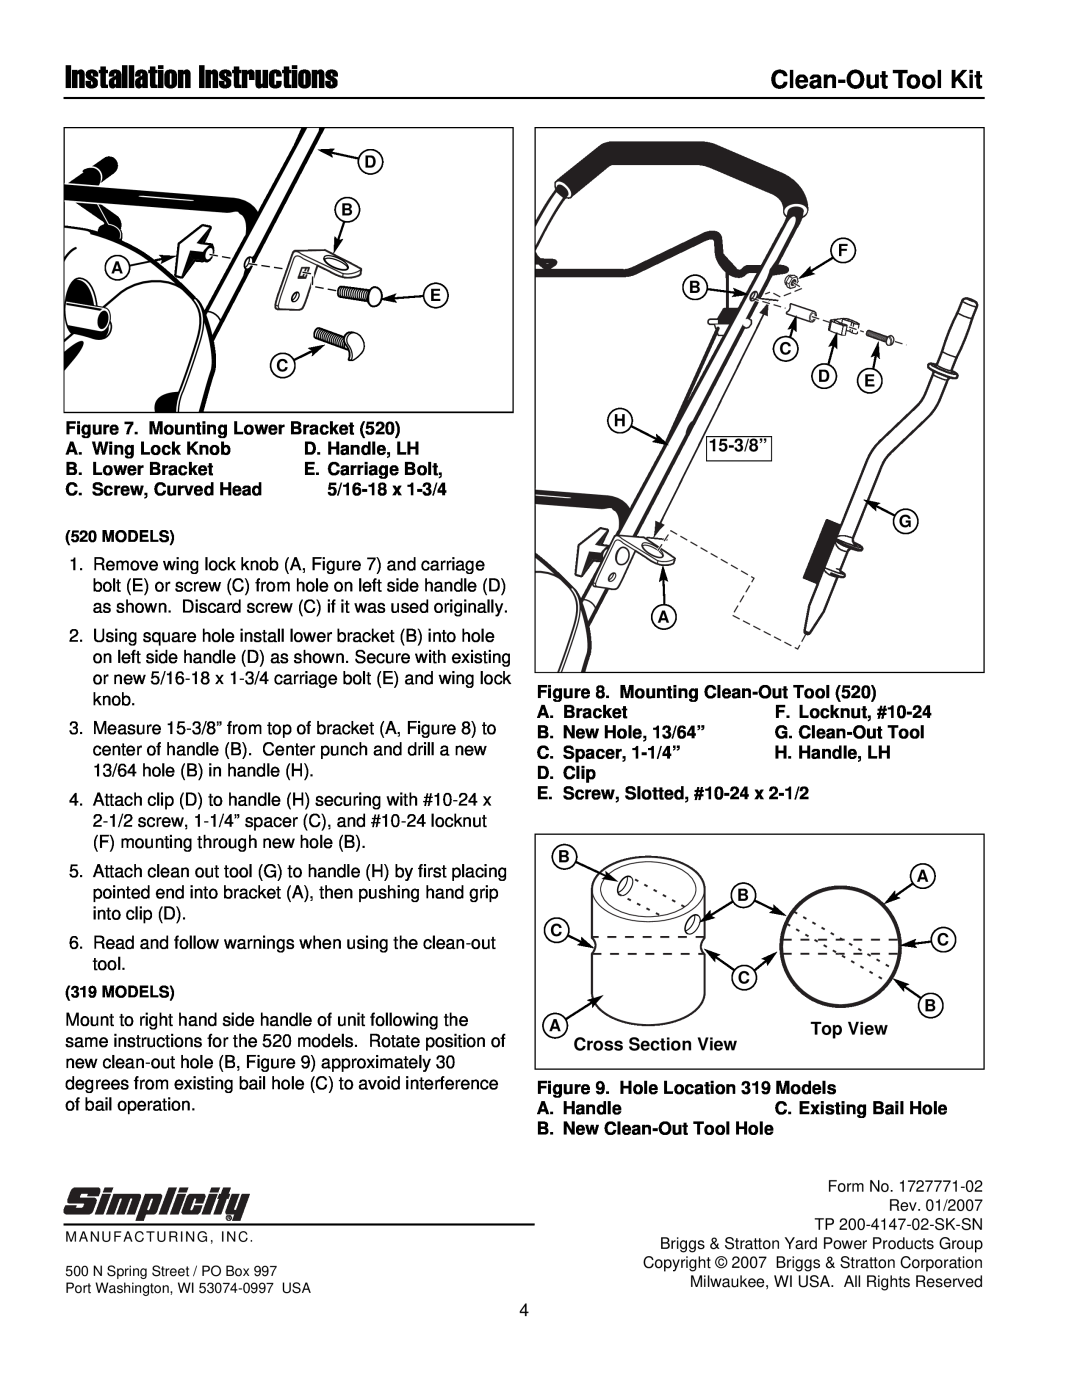 Snapper 1687099 installation instructions Installation Instructions, Clean-OutTool Kit 